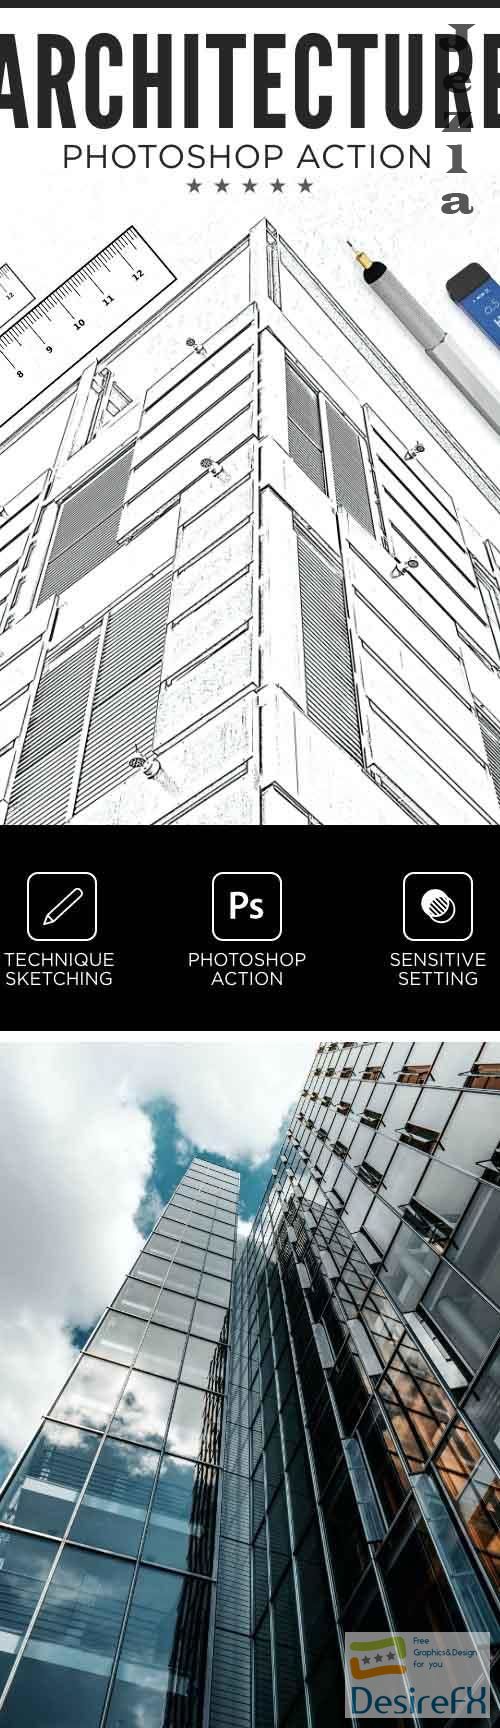 architecture photoshop action free download